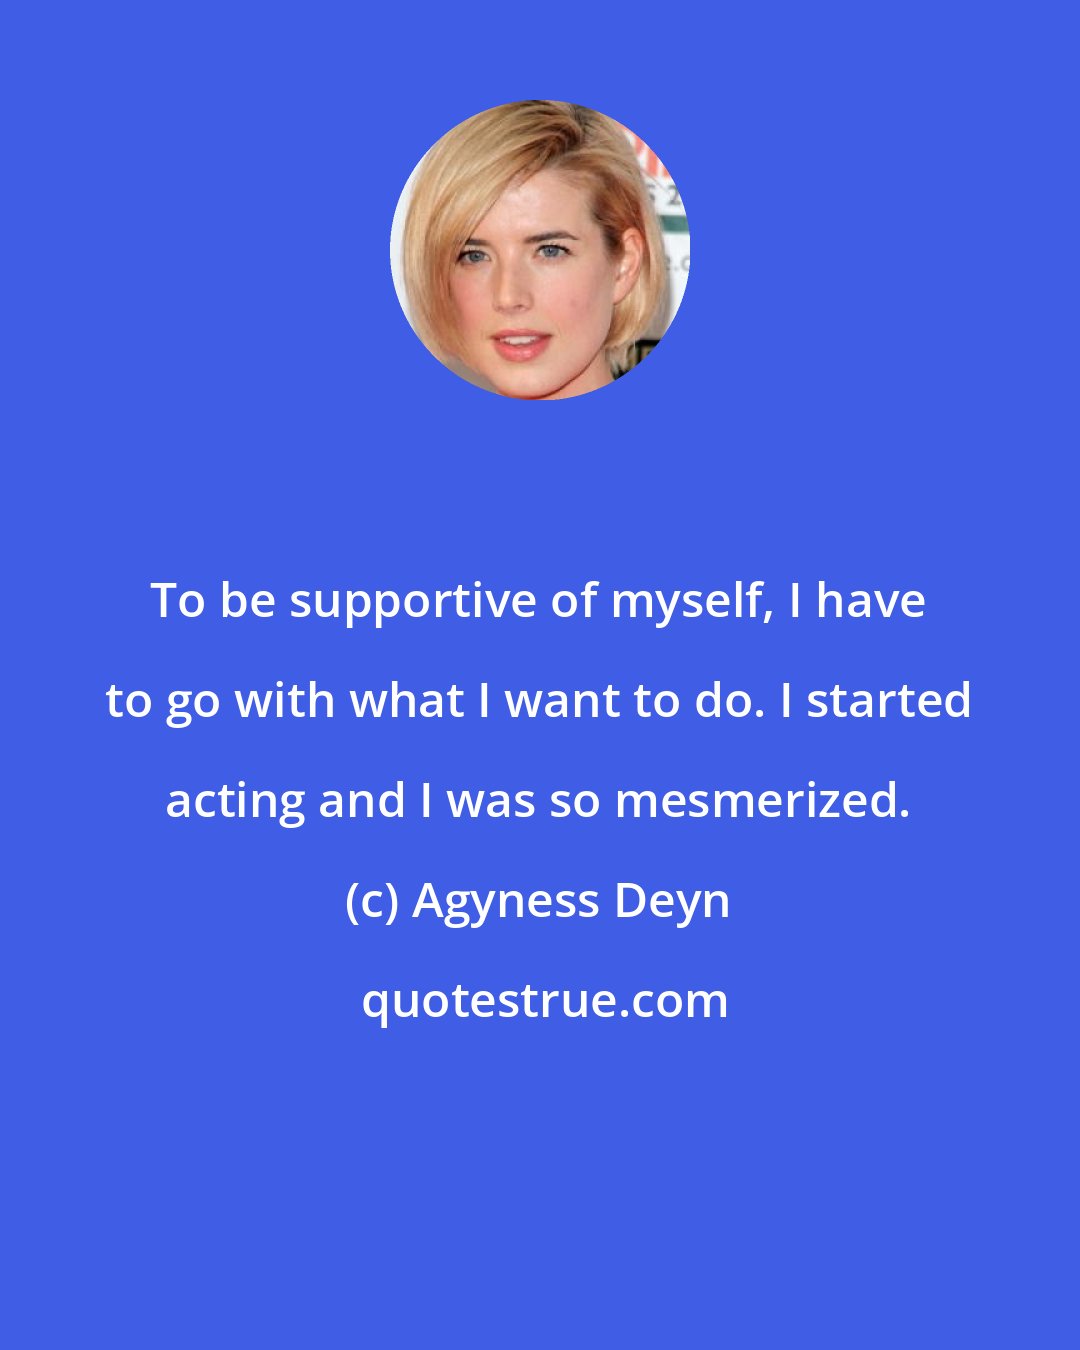 Agyness Deyn: To be supportive of myself, I have to go with what I want to do. I started acting and I was so mesmerized.